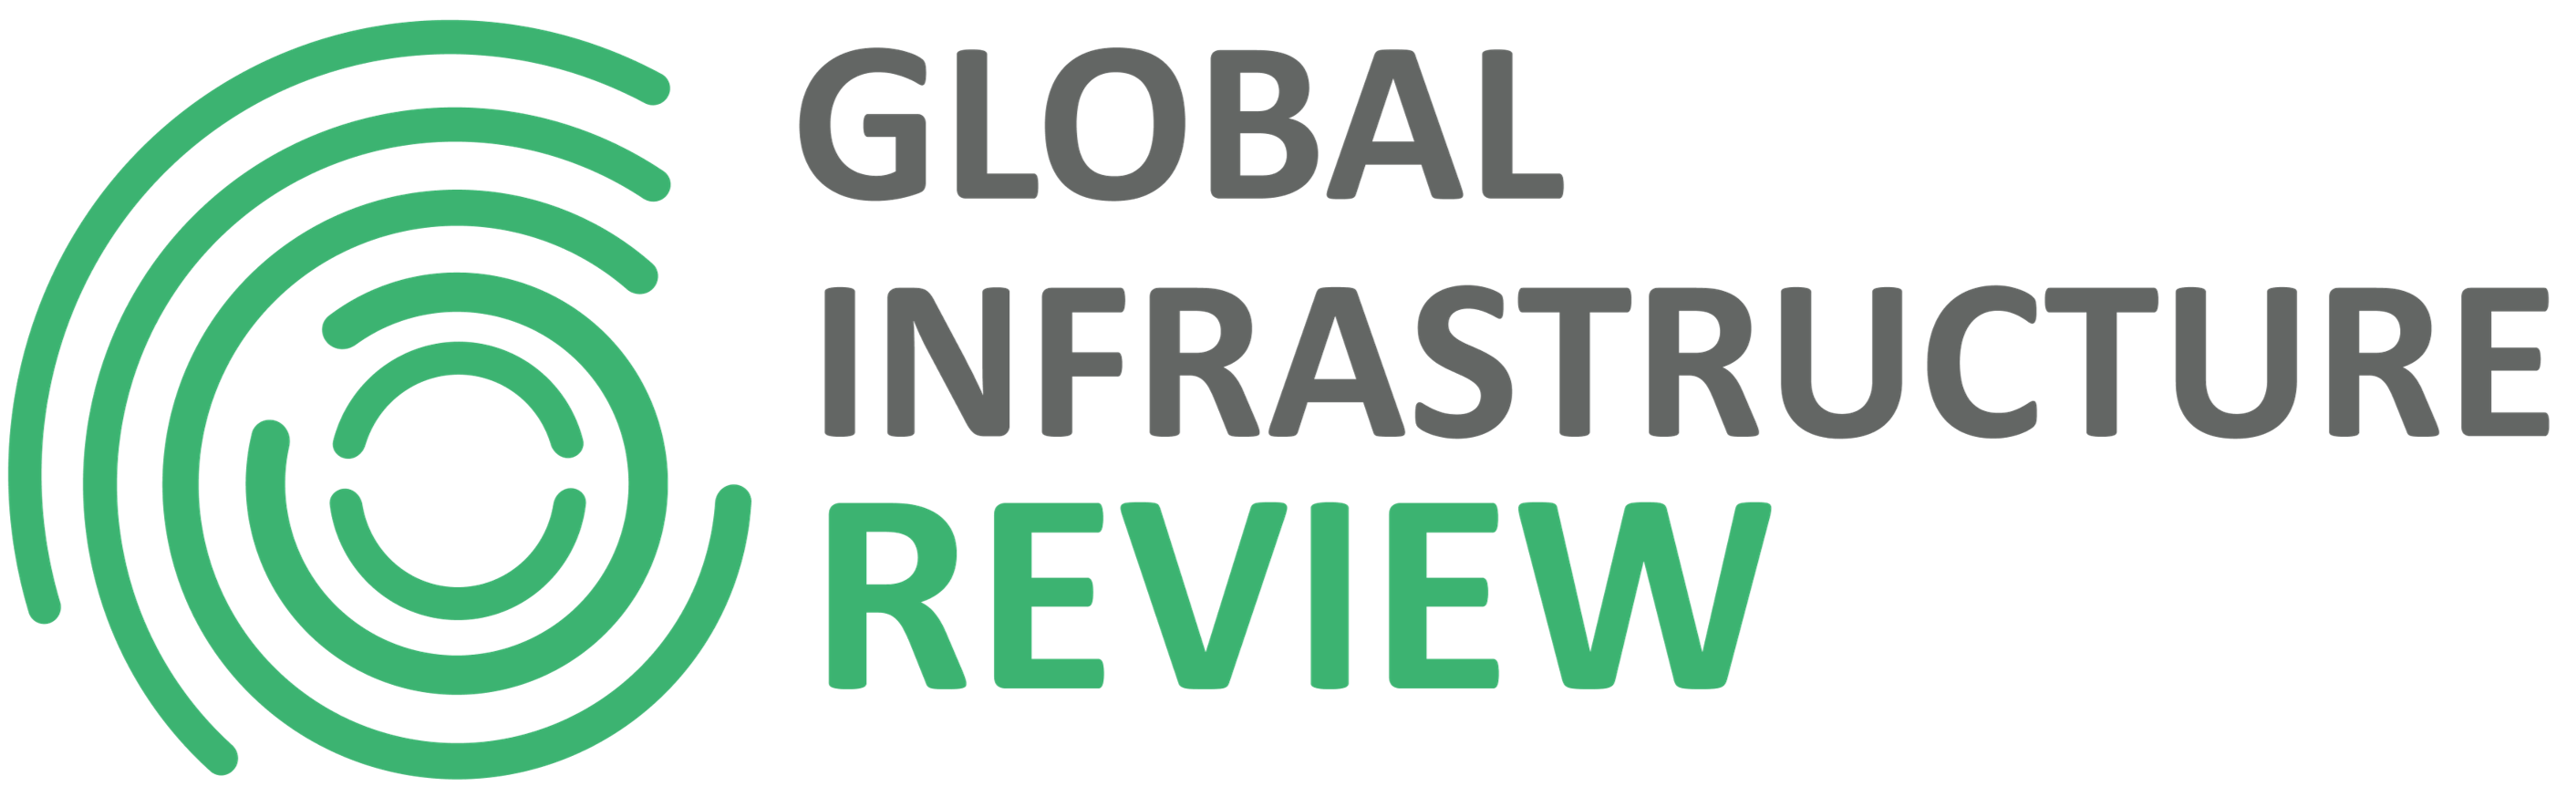 Global Infrastructure Review 